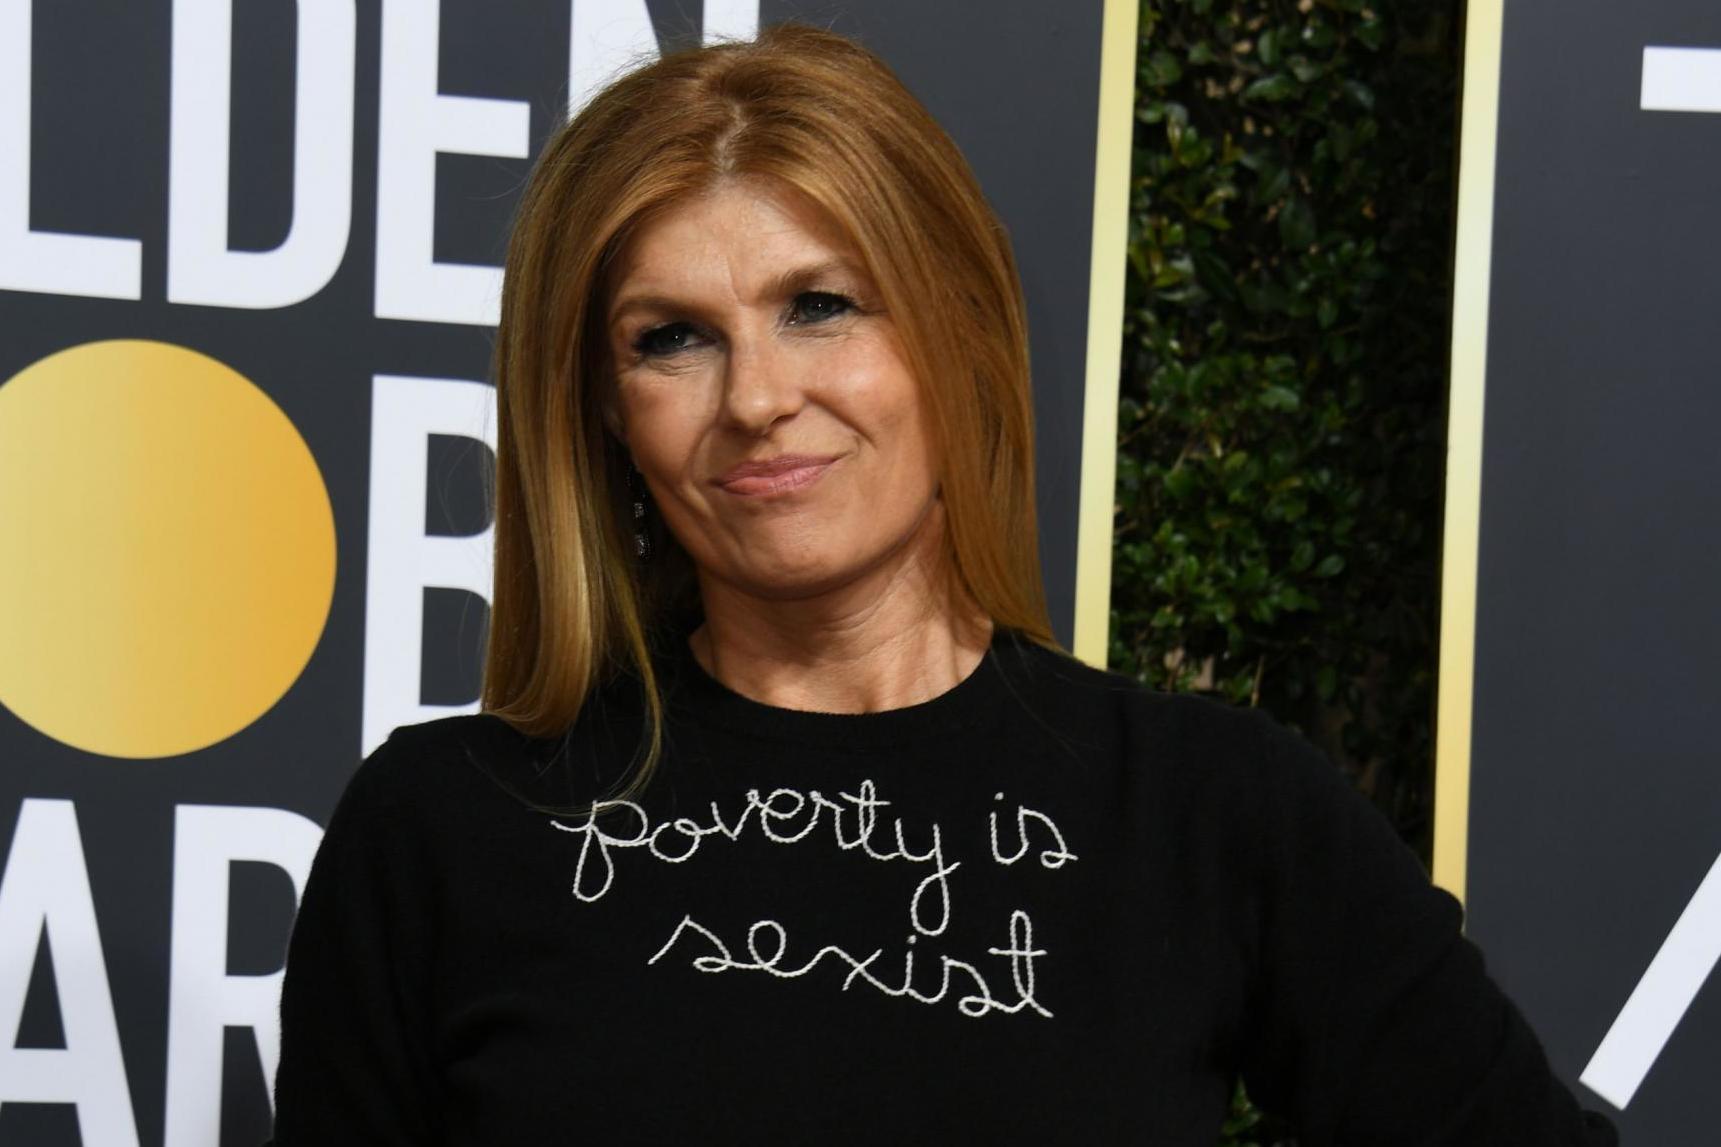 Connie Britton arrives for the 75th Golden Globe Awards on January 7, 2018, in Beverly Hills, California.Photo: VALERIE MACON/AFP/Getty Images.